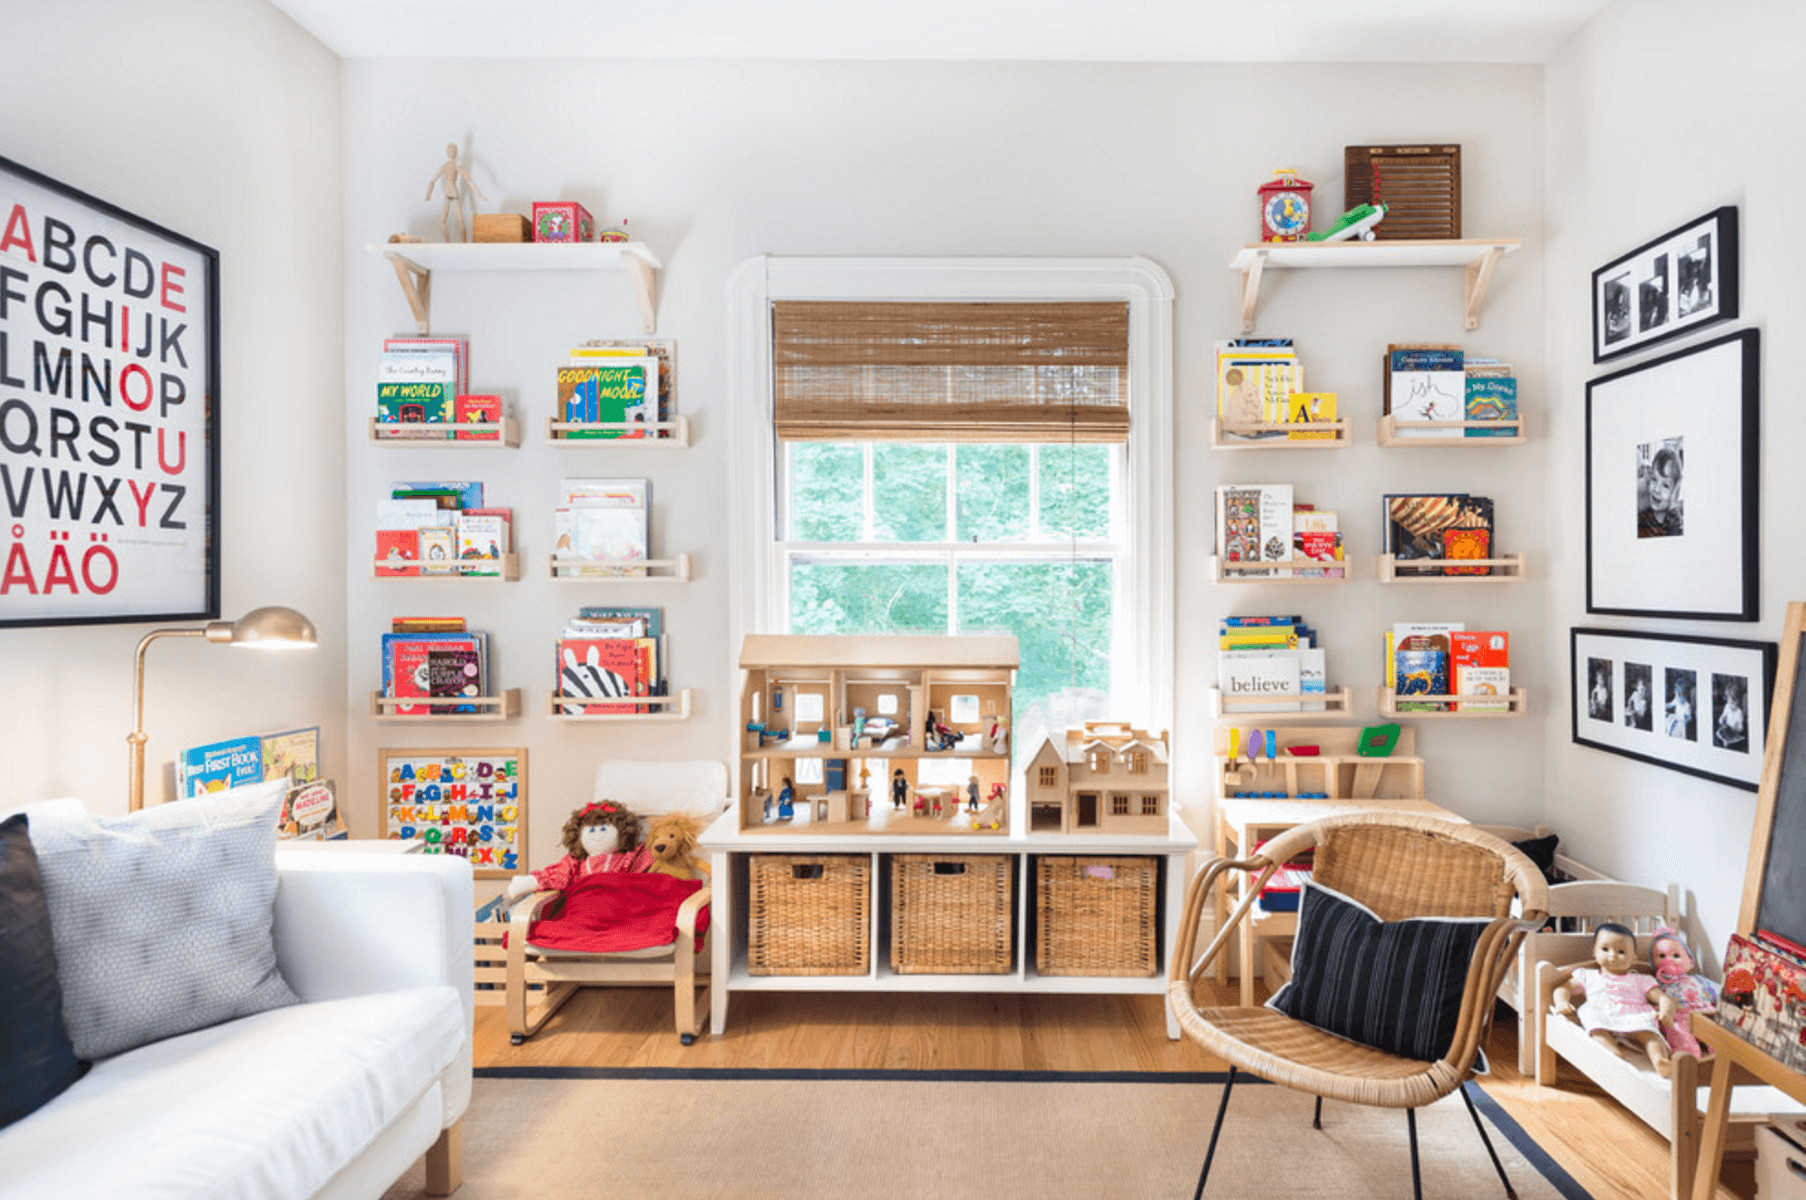 Ideas For Kids Rooms
 28 Ideas for Adding Color to a Kids Room